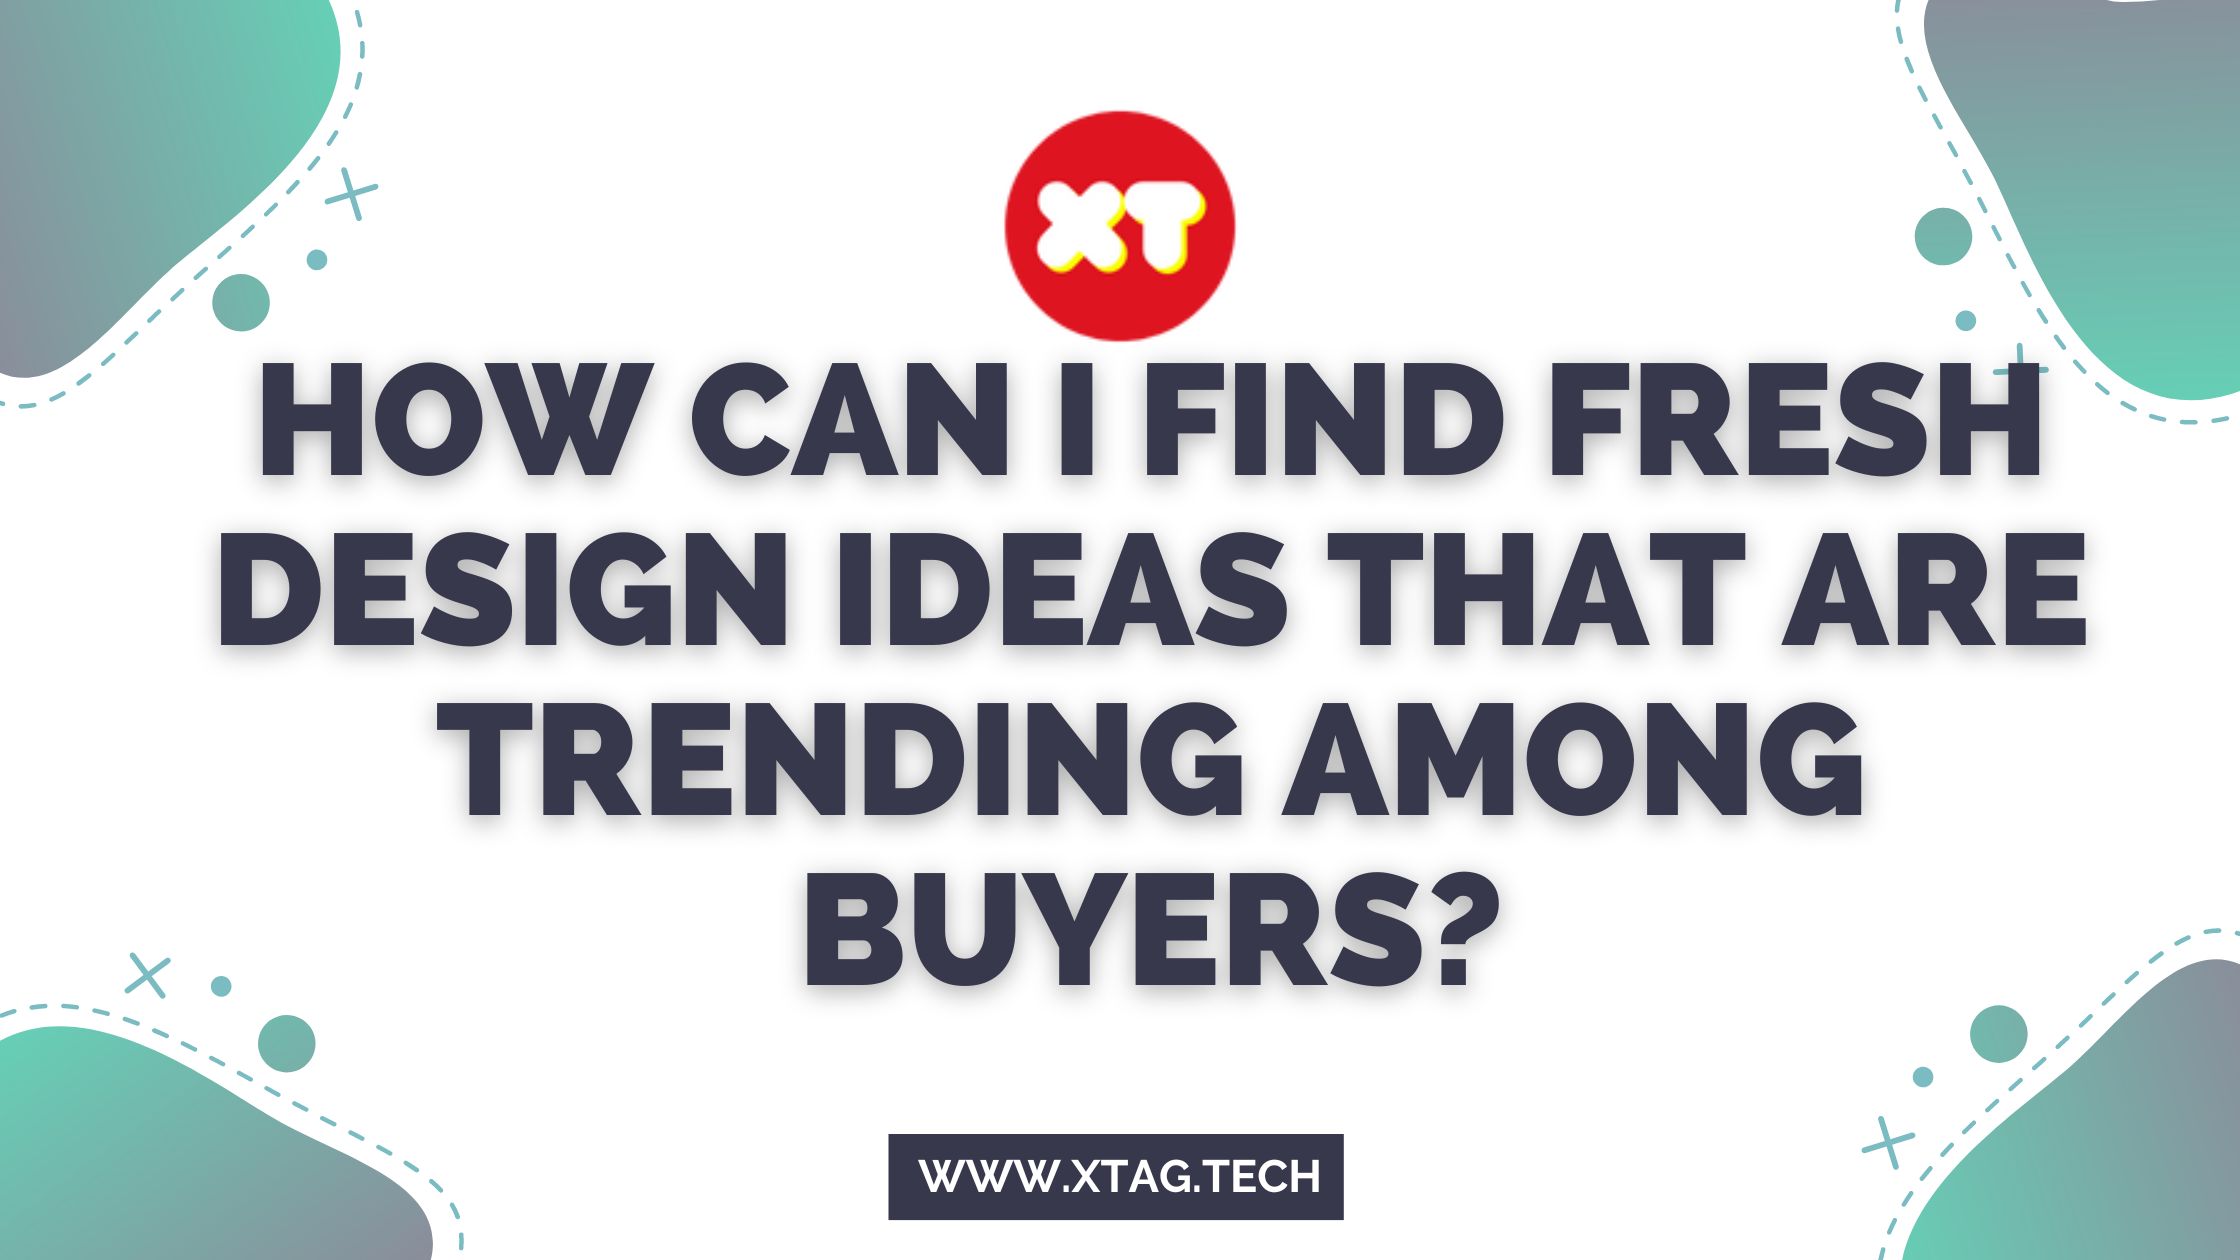 How Can I Find Fresh Design Ideas That Are Trending Among Buyers?